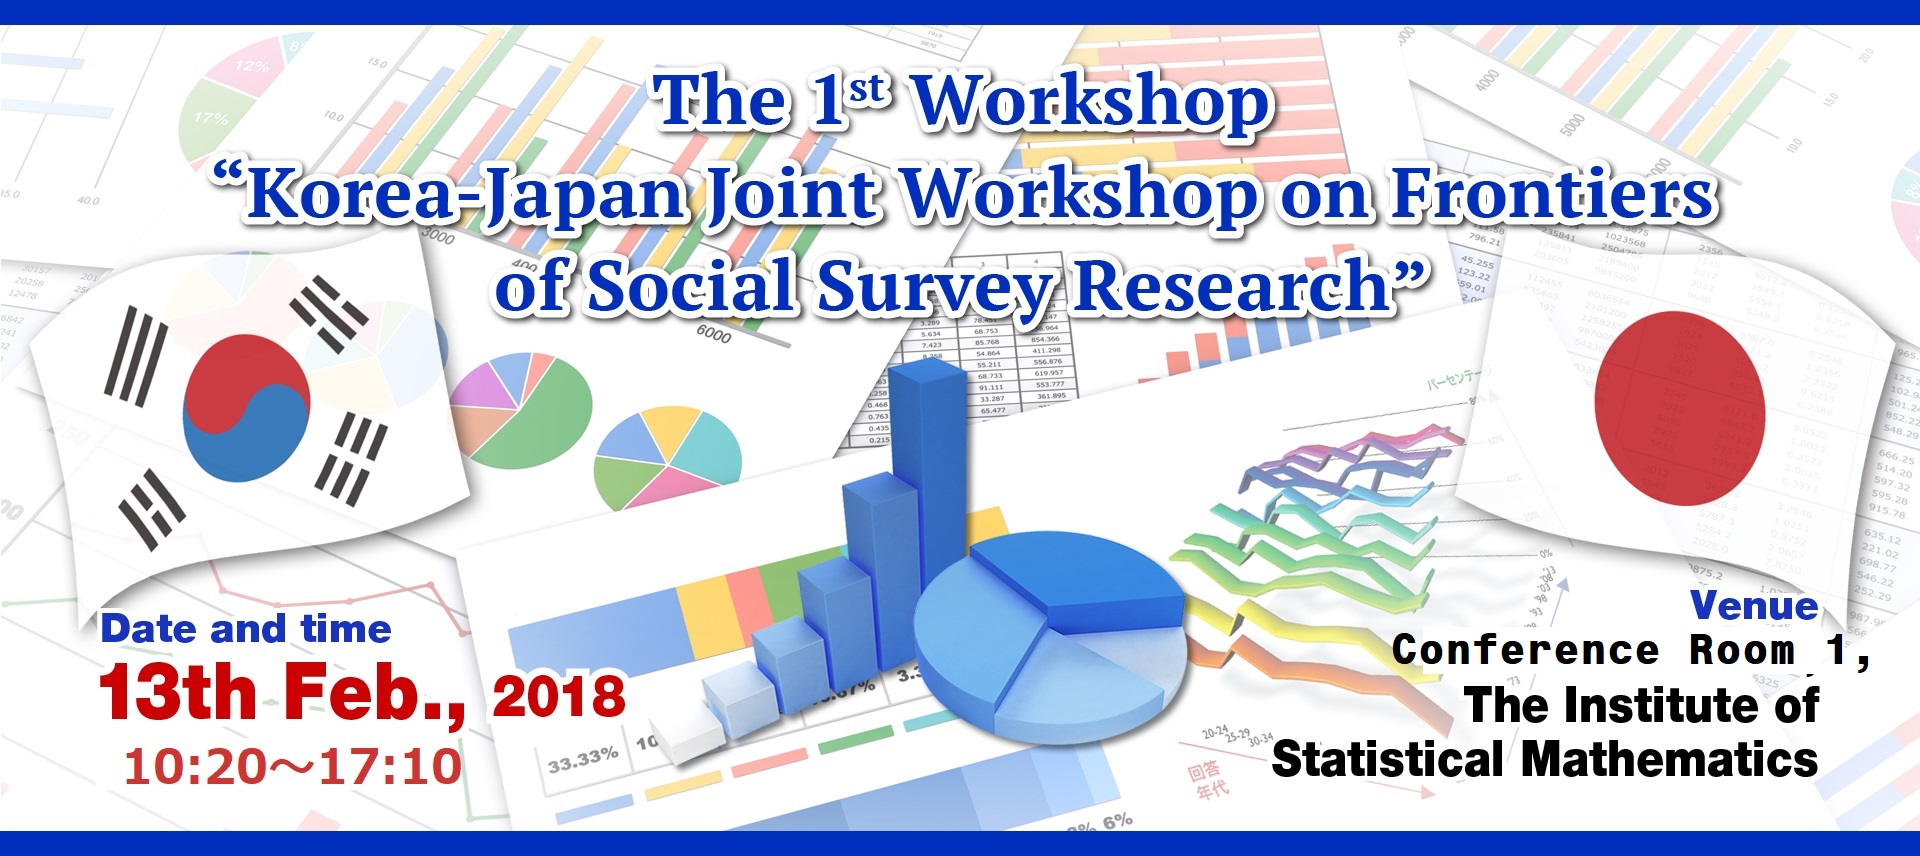 The 1st workshop of “Korea-Japan Joint Workshop on Frontiers of Social Survey Research”